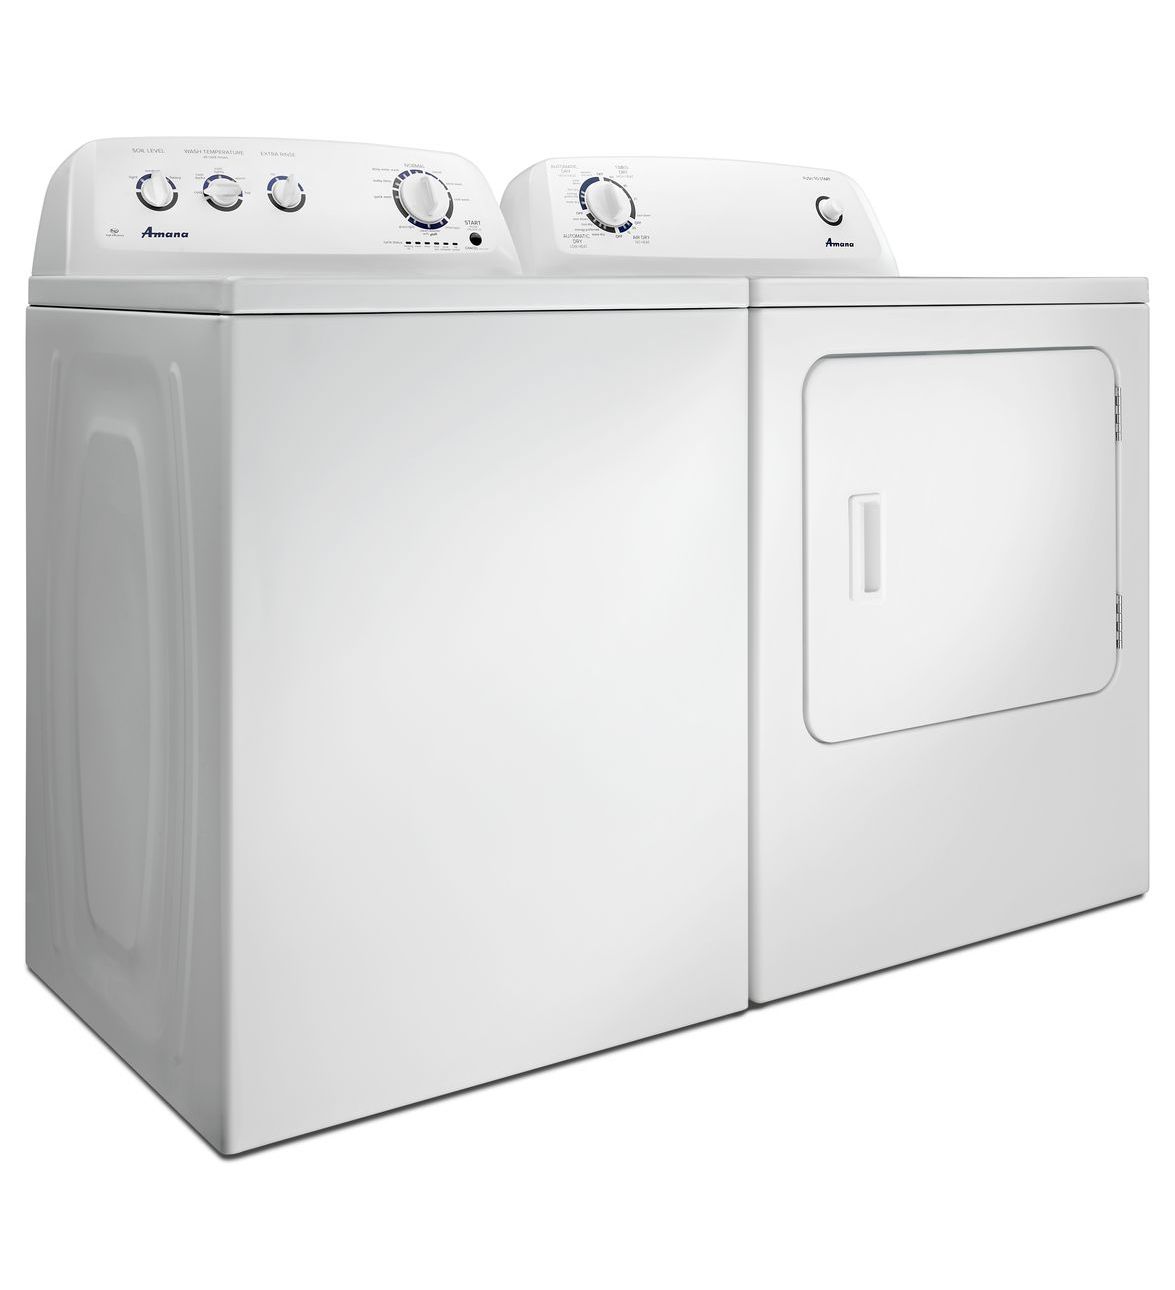 ngd4655ew-amana-6-5-cu-ft-top-load-gas-dryer-with-automatic